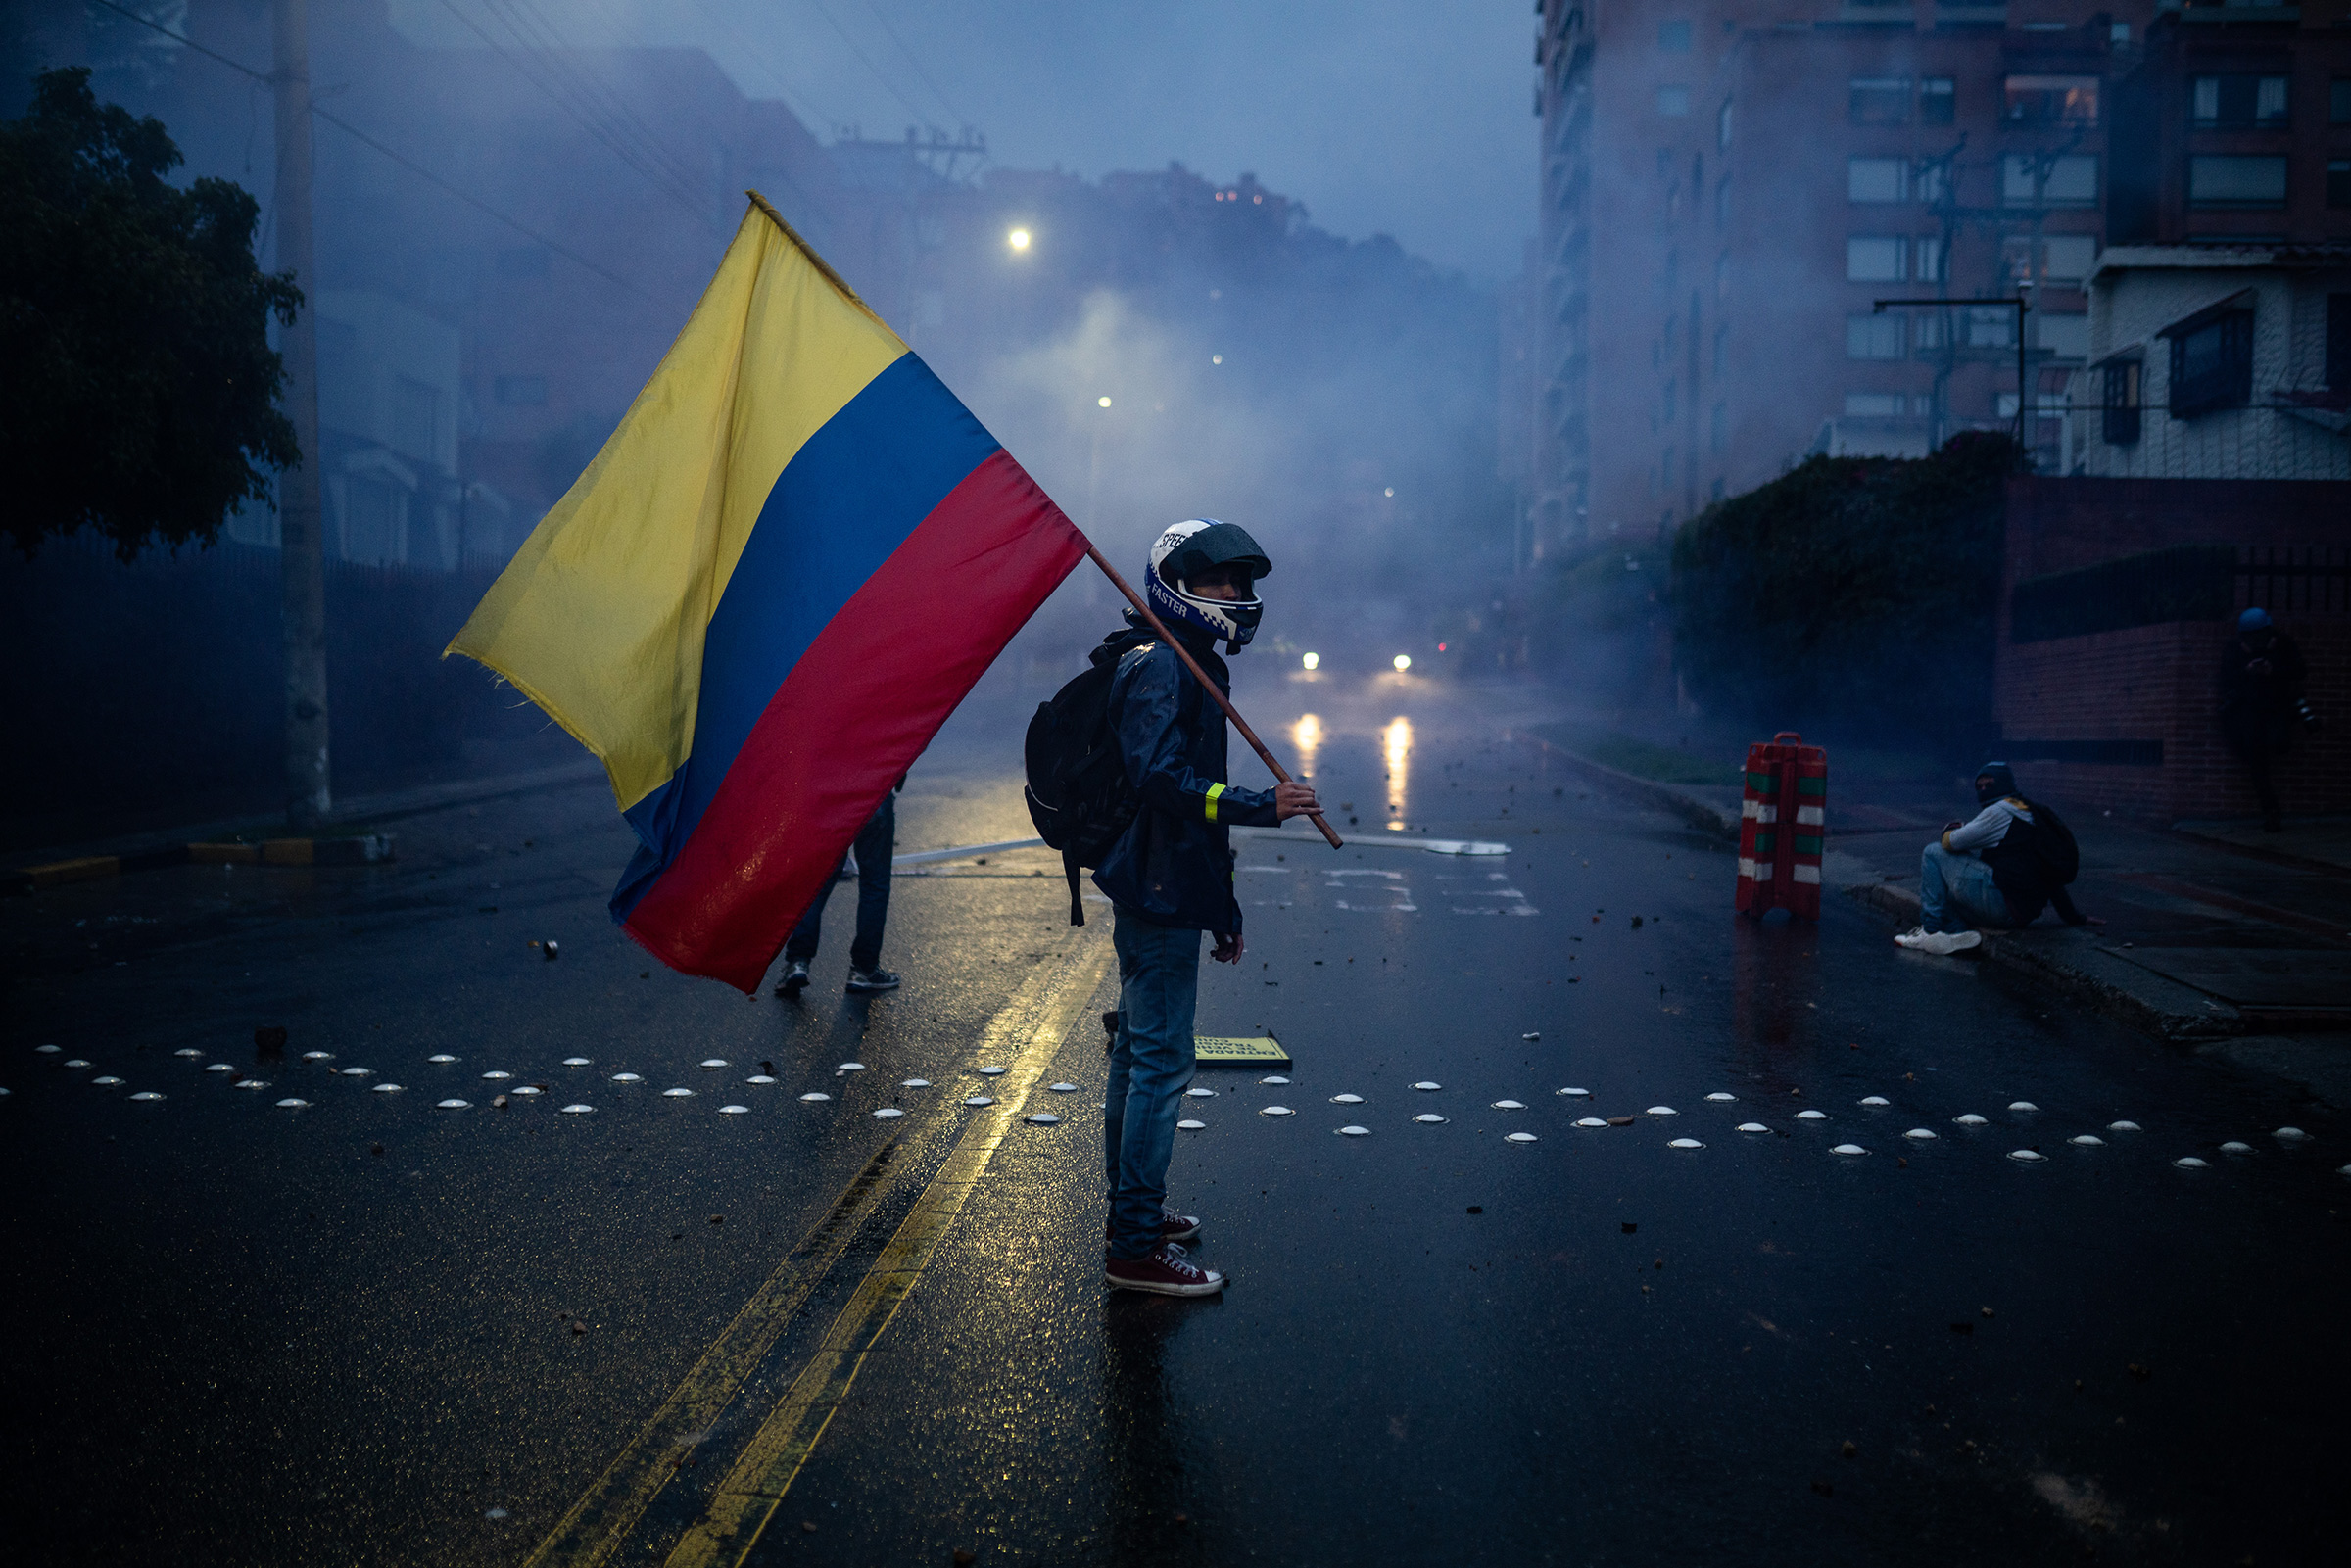 Young people are leading the protests, so far 222 cases of physical violence have been registered. The Colombian flag is a symbol that many use during the protest.  Picture by Andrés Cardona.